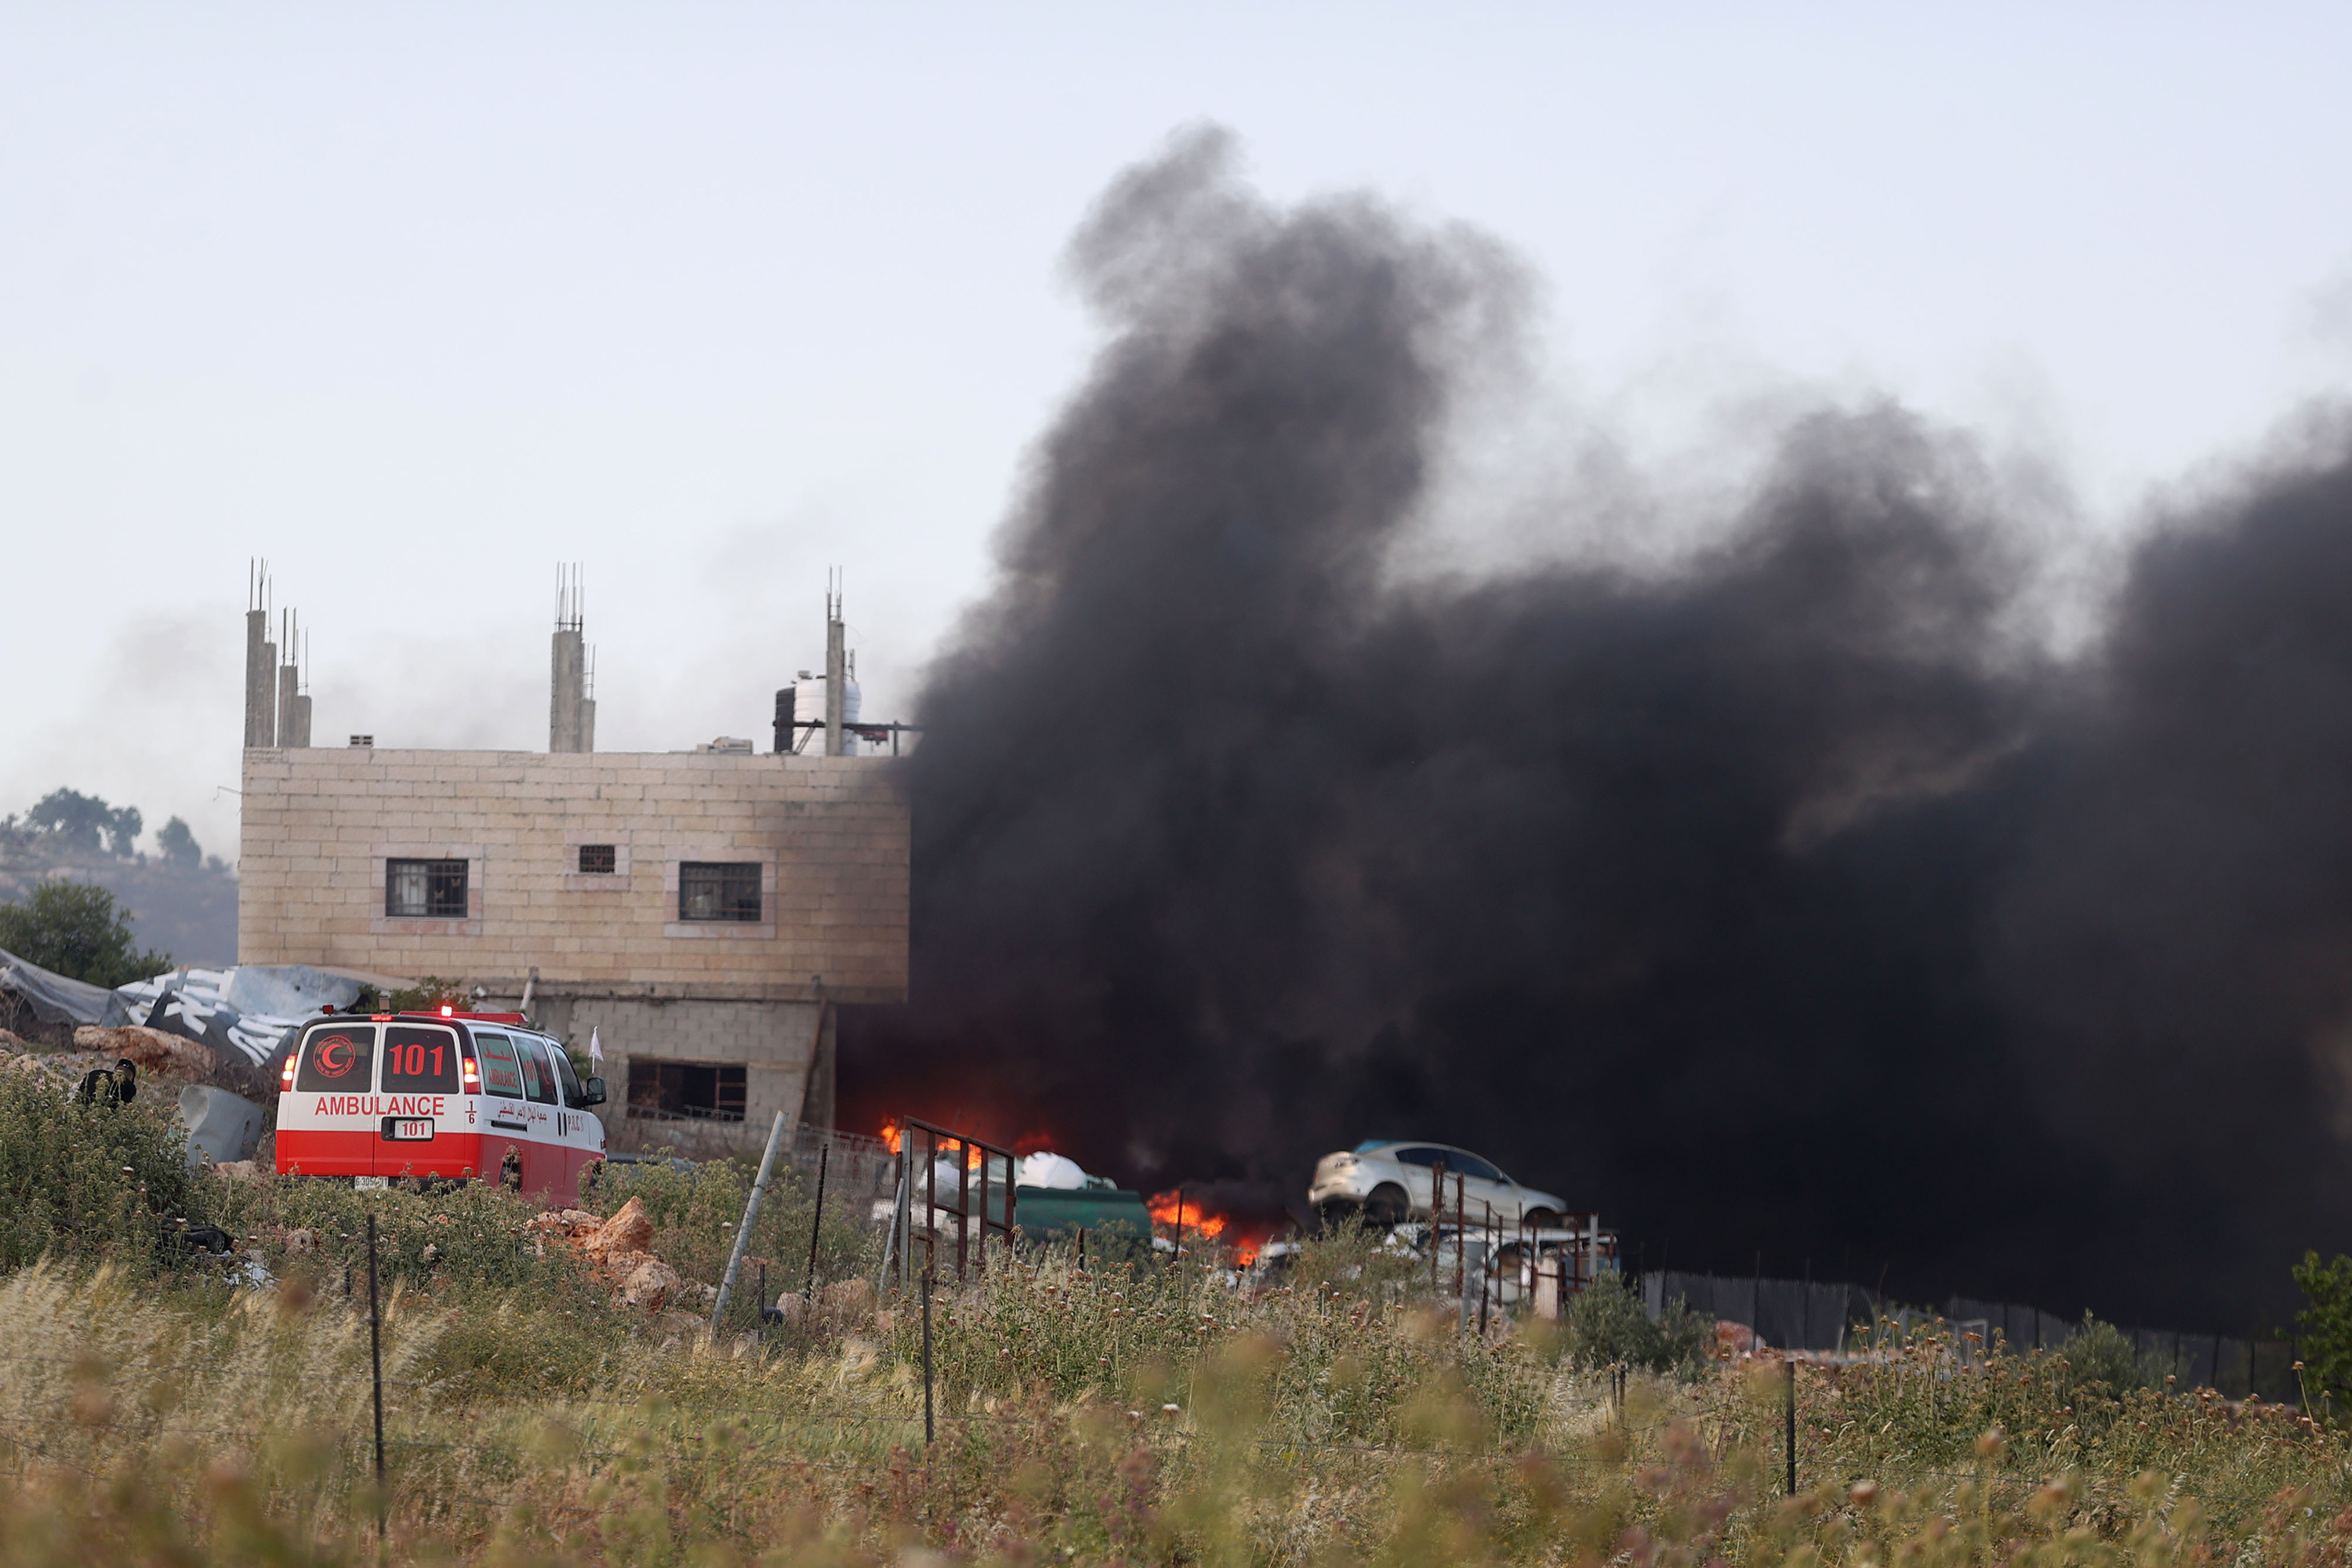 A view of damaged houses and burning vehicles after a raid by Israeli settlers on a town near Ramallah, West Bank on April 12.